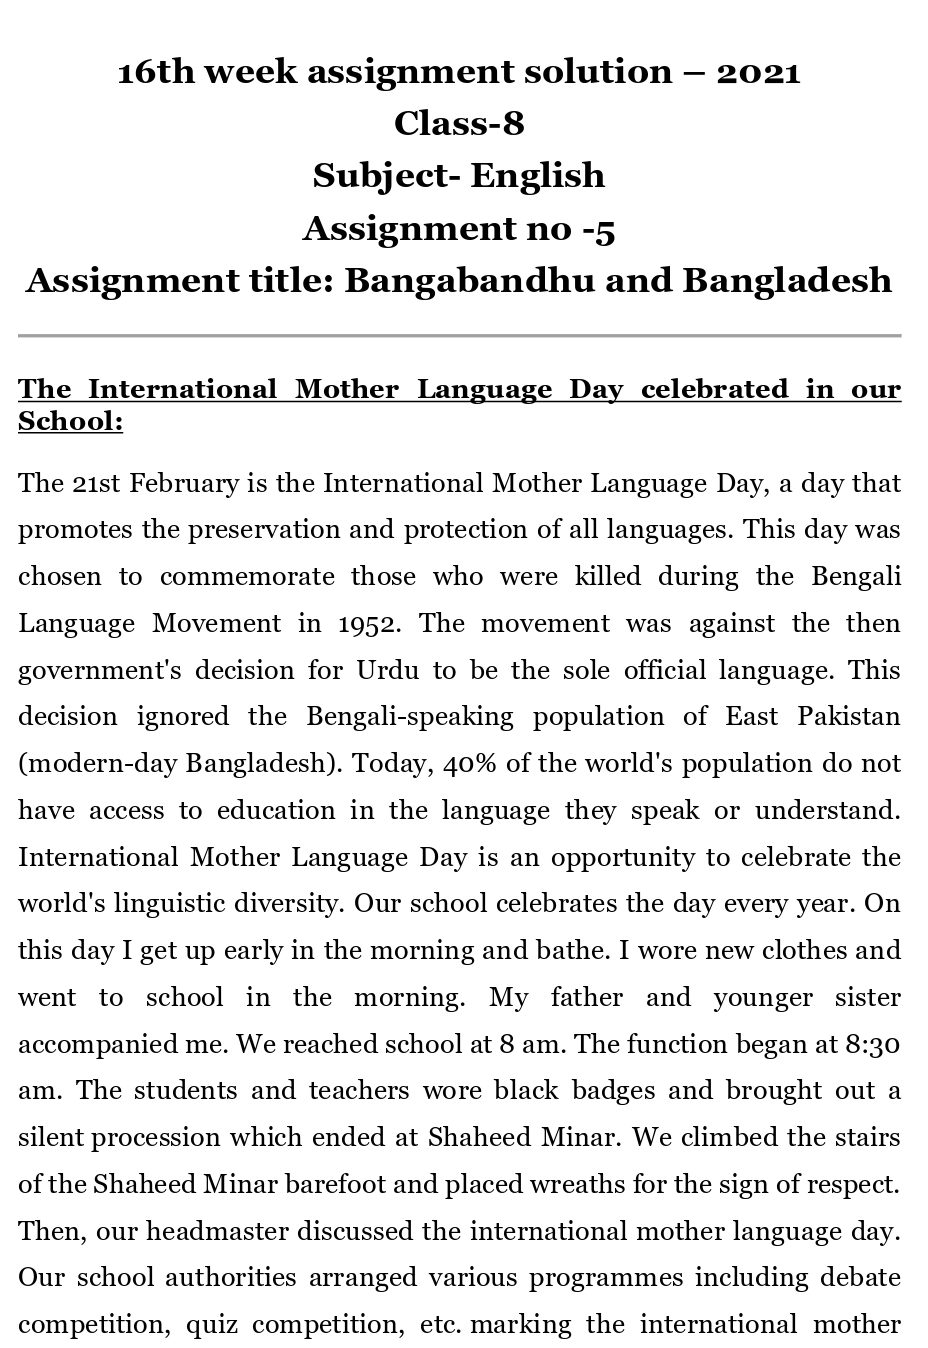 class 8 english assignment 16th week 2021 answer_page-0001